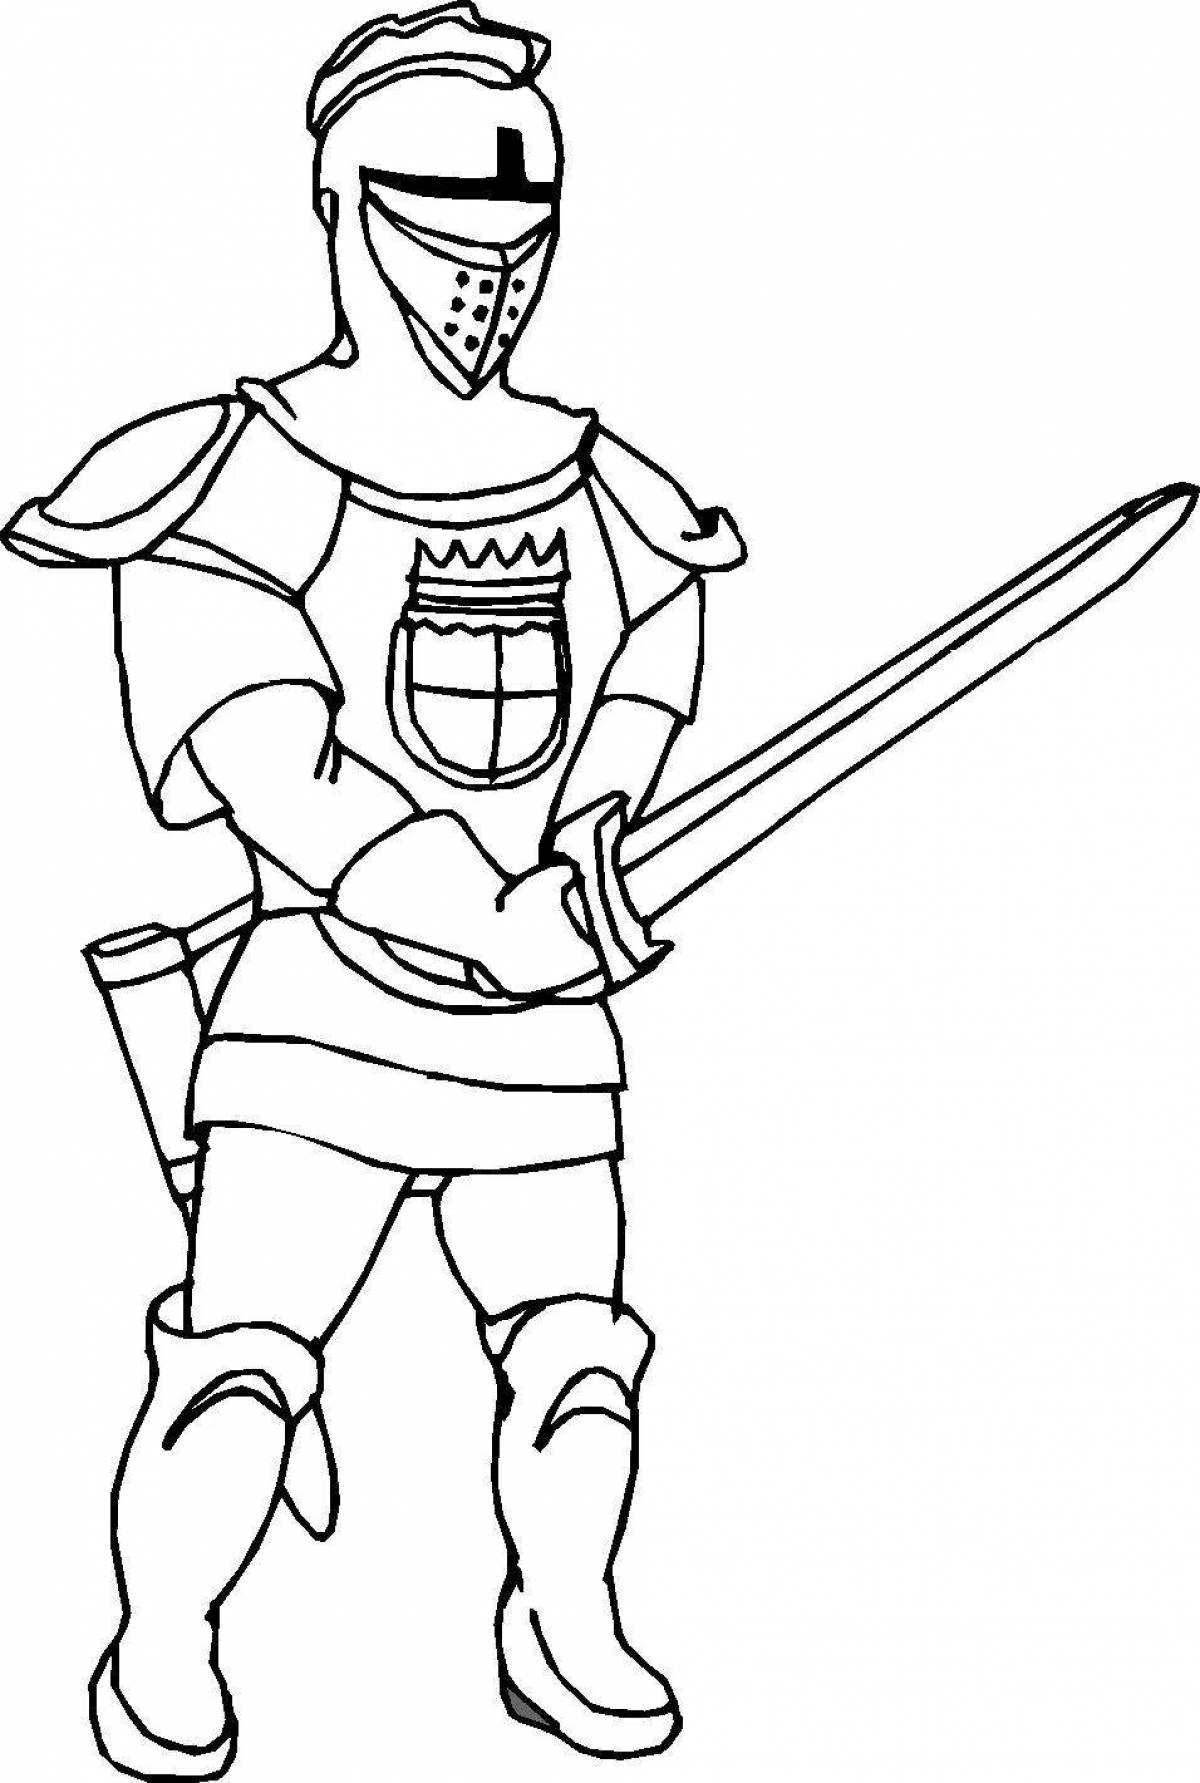 Relentless warrior coloring page